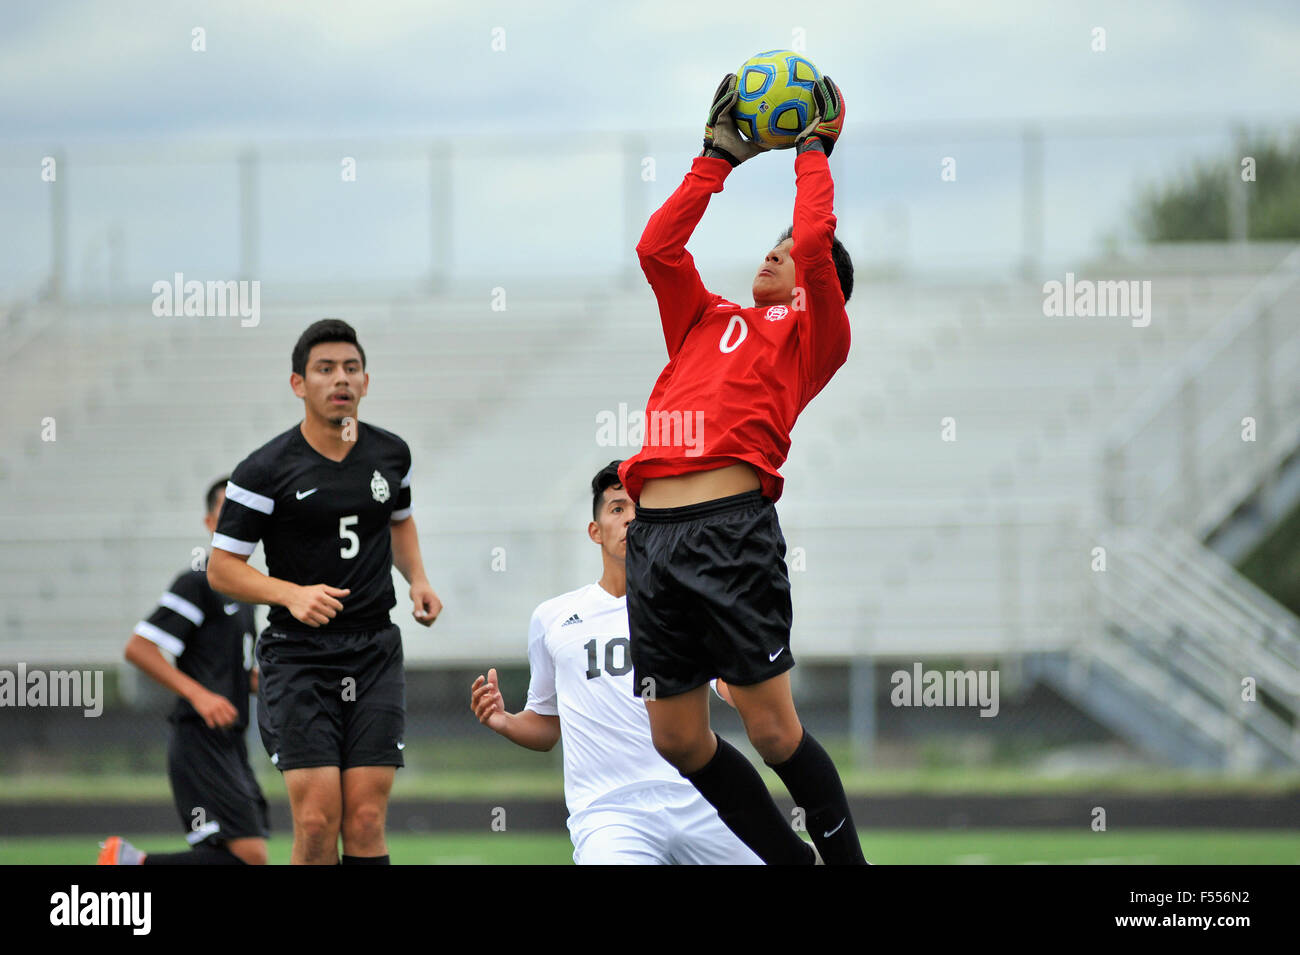 A high school keeper leaves the pitch to make a save on a shot that was destined  for an upper corner of the net. Stock Photo